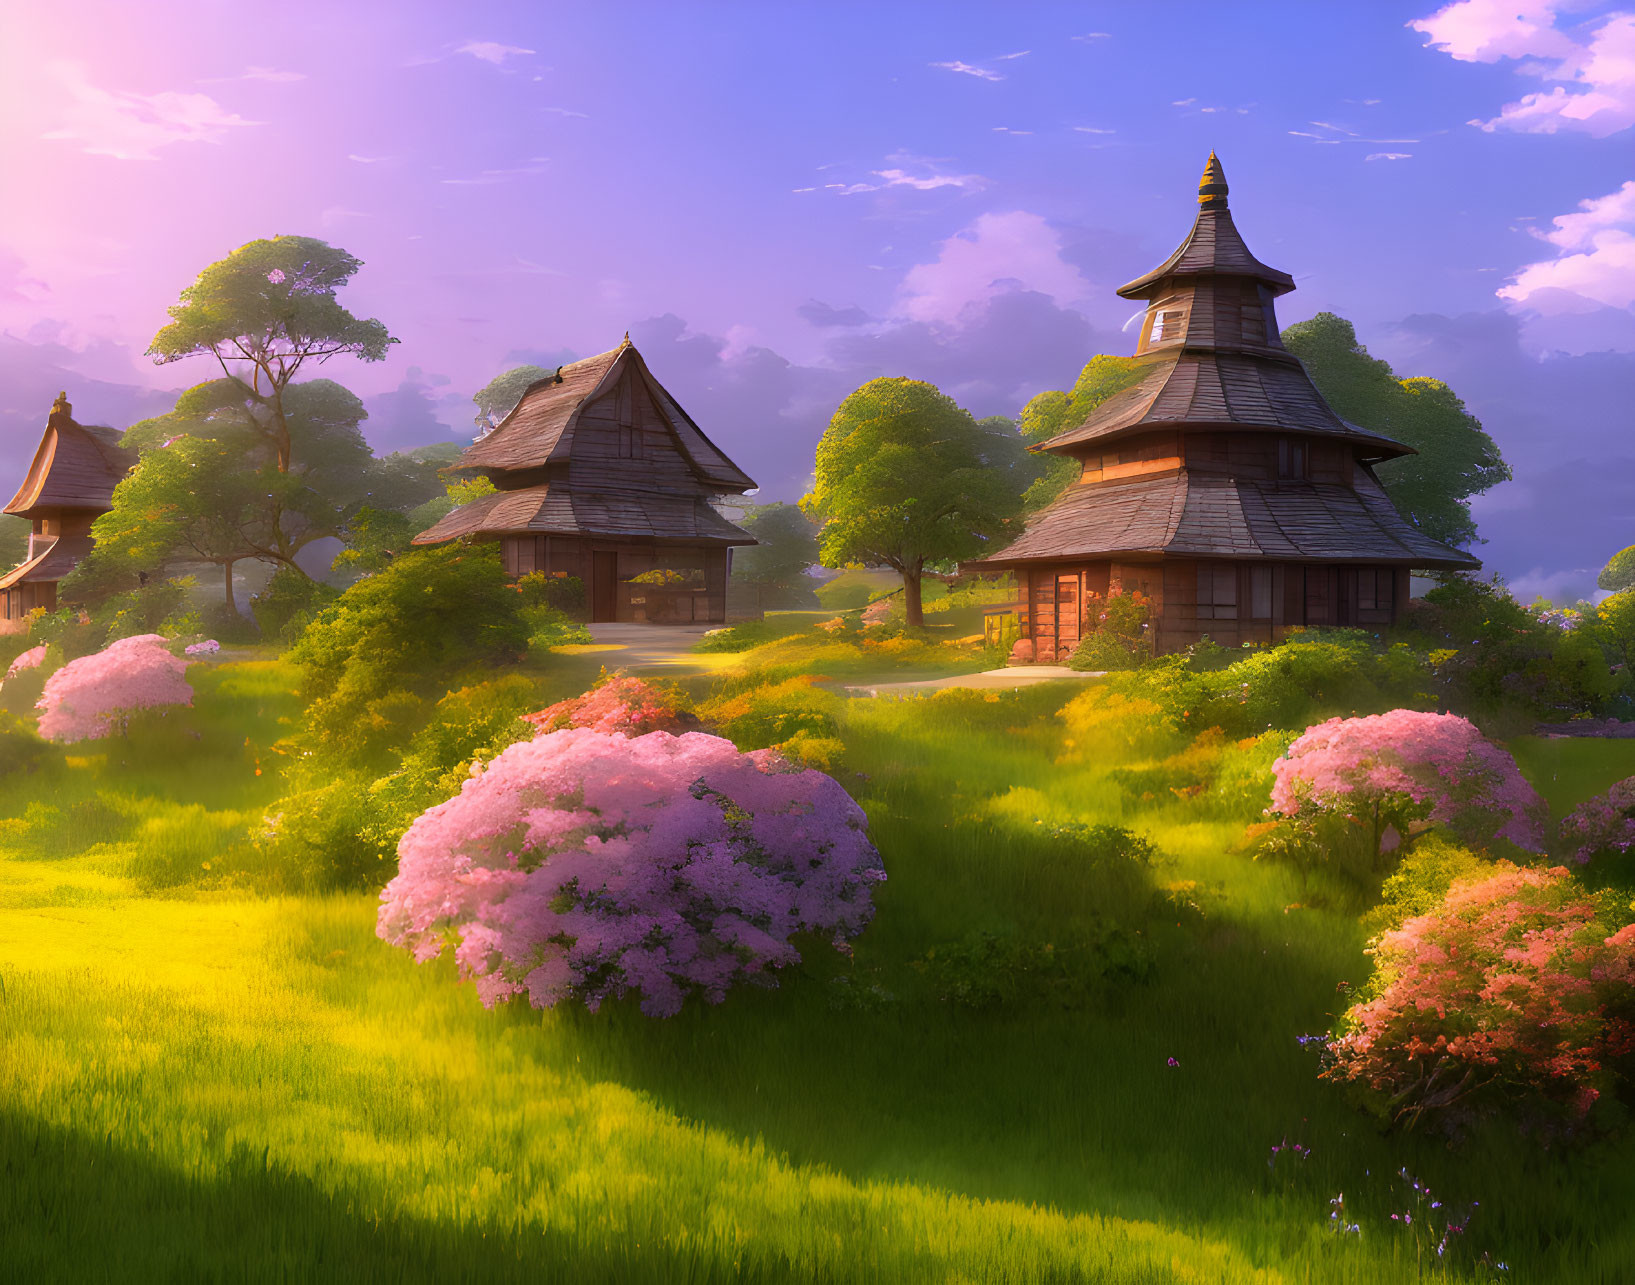 Tranquil fantasy landscape with wooden structures and vibrant flowers